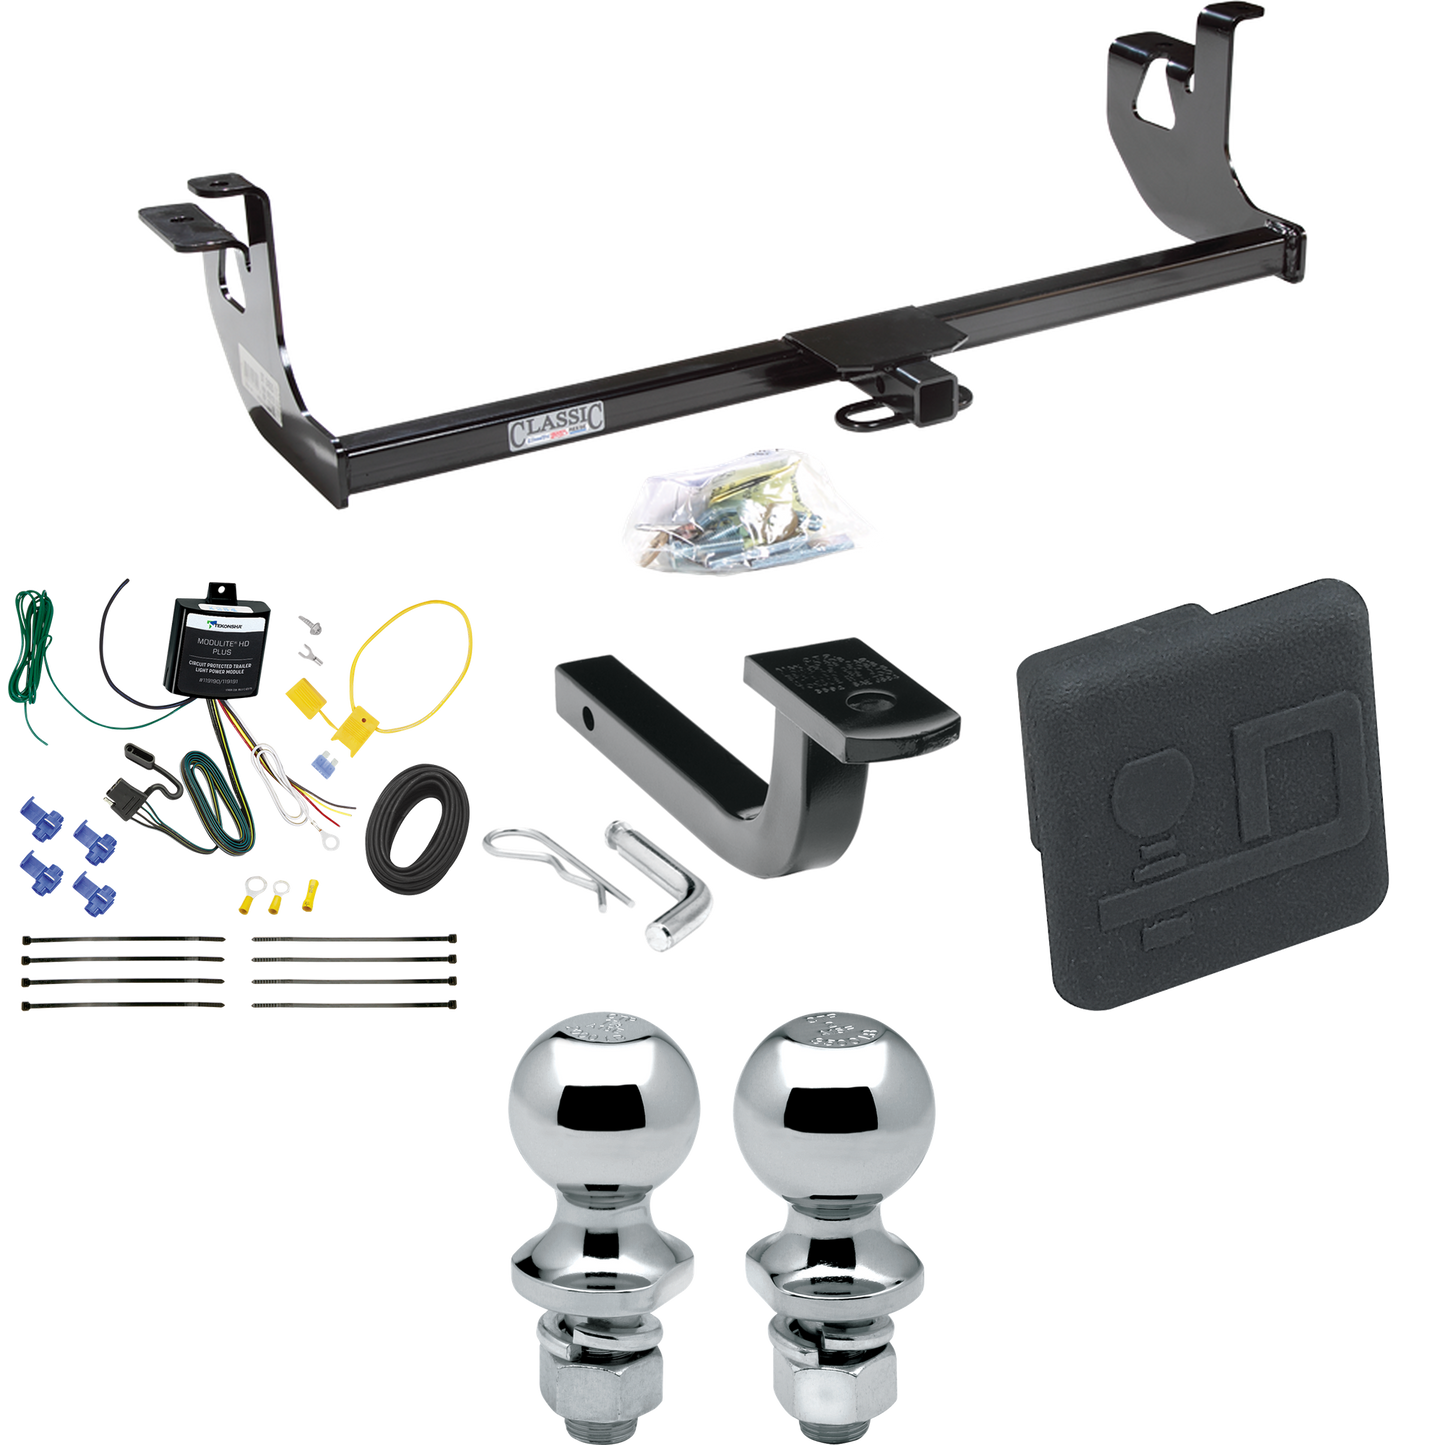 Fits 2006-2009 Volkswagen GTI Trailer Hitch Tow PKG w/ 4-Flat Wiring Harness + Draw-Bar + 1-7/8" + 2" Ball + Hitch Cover (For 2 Dr. Hatchback Models) By Draw-Tite